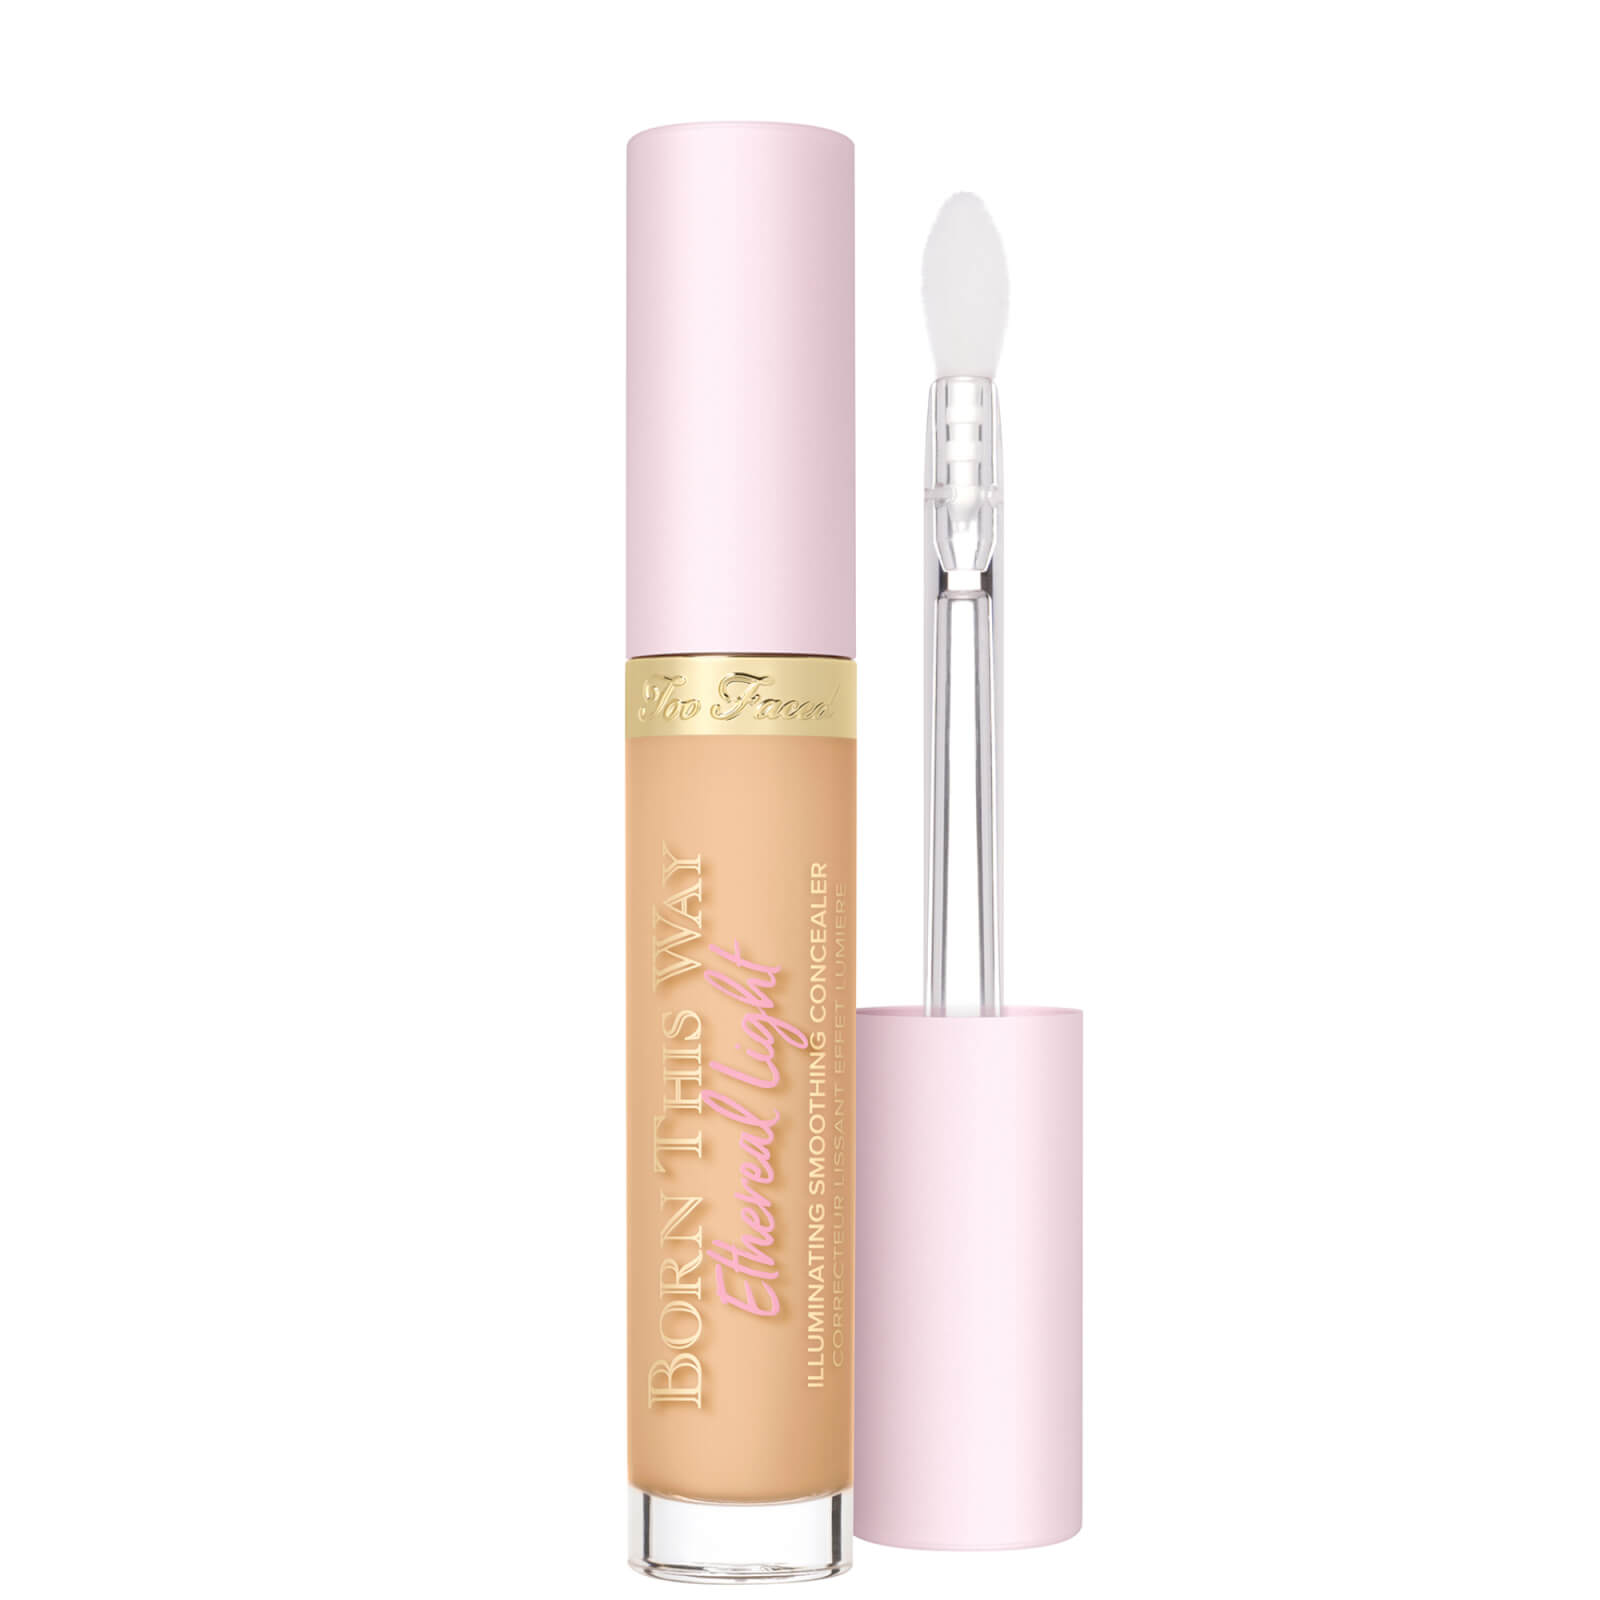 Too Faced Born This Way Ethereal Light Illuminating Smoothing Concealer 15ml (Various Shades) - Peca